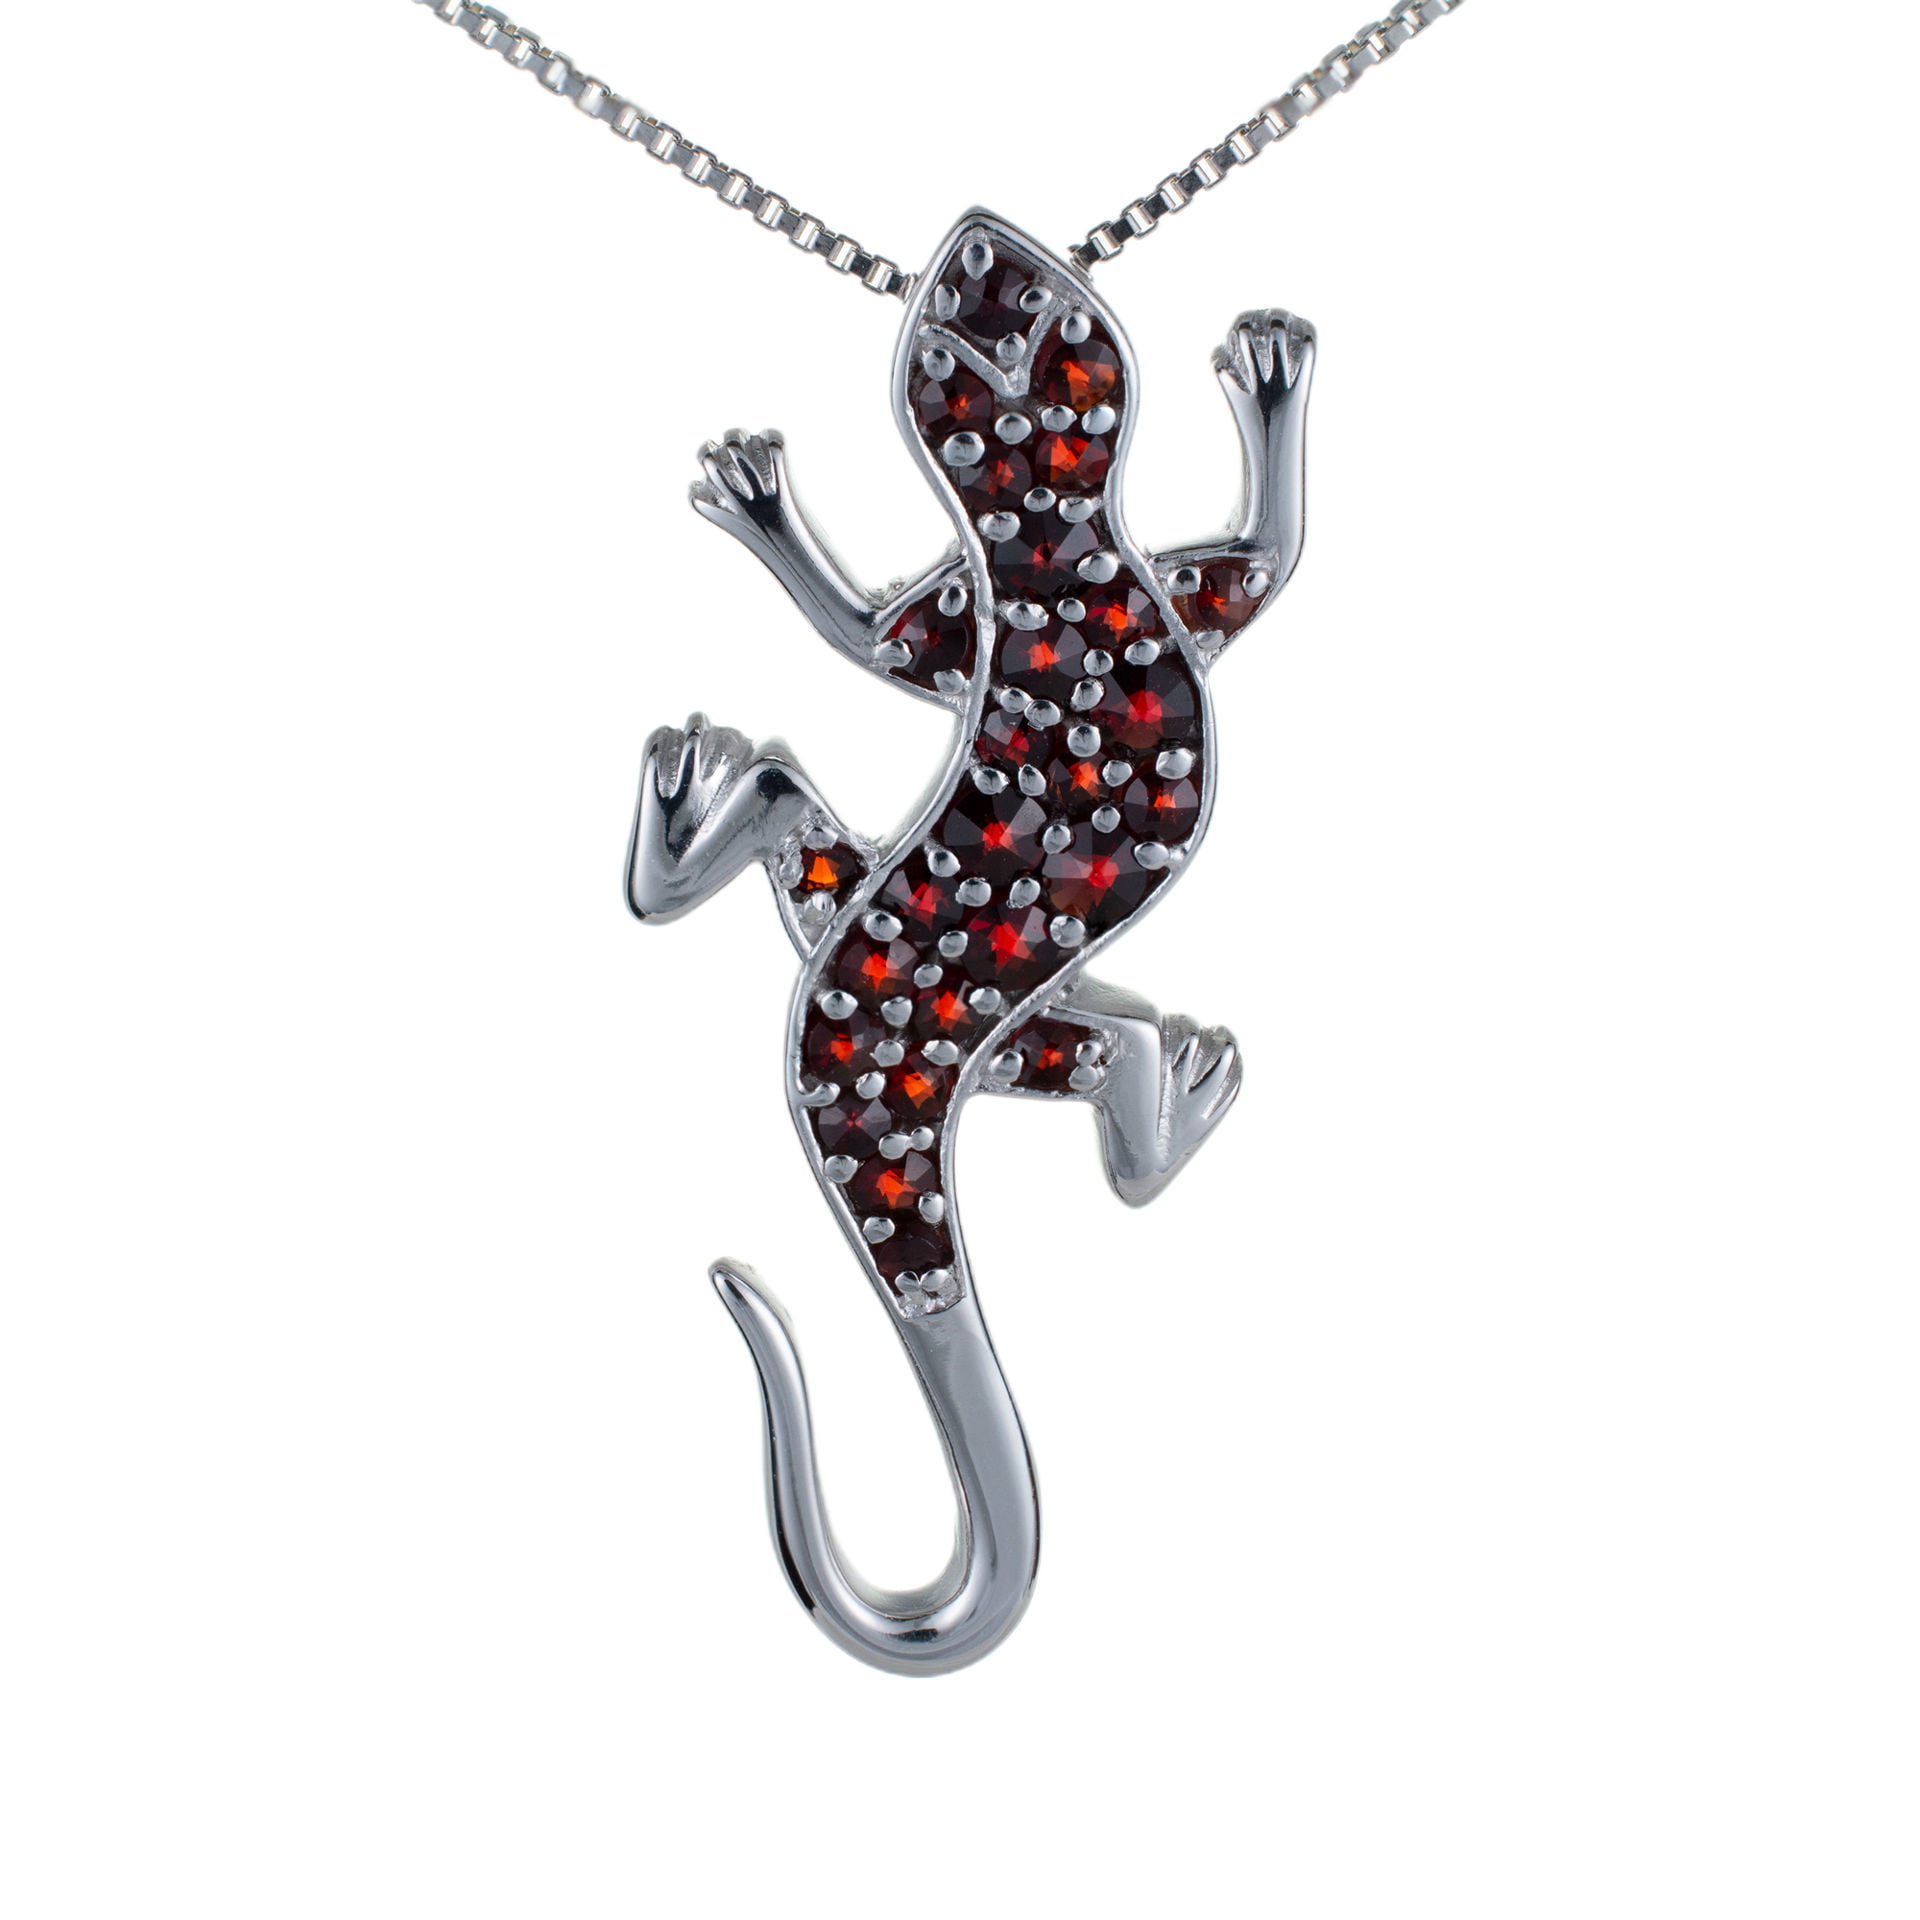 Lizard Pendant 925 Sterling Silver Created Opal Choose Color